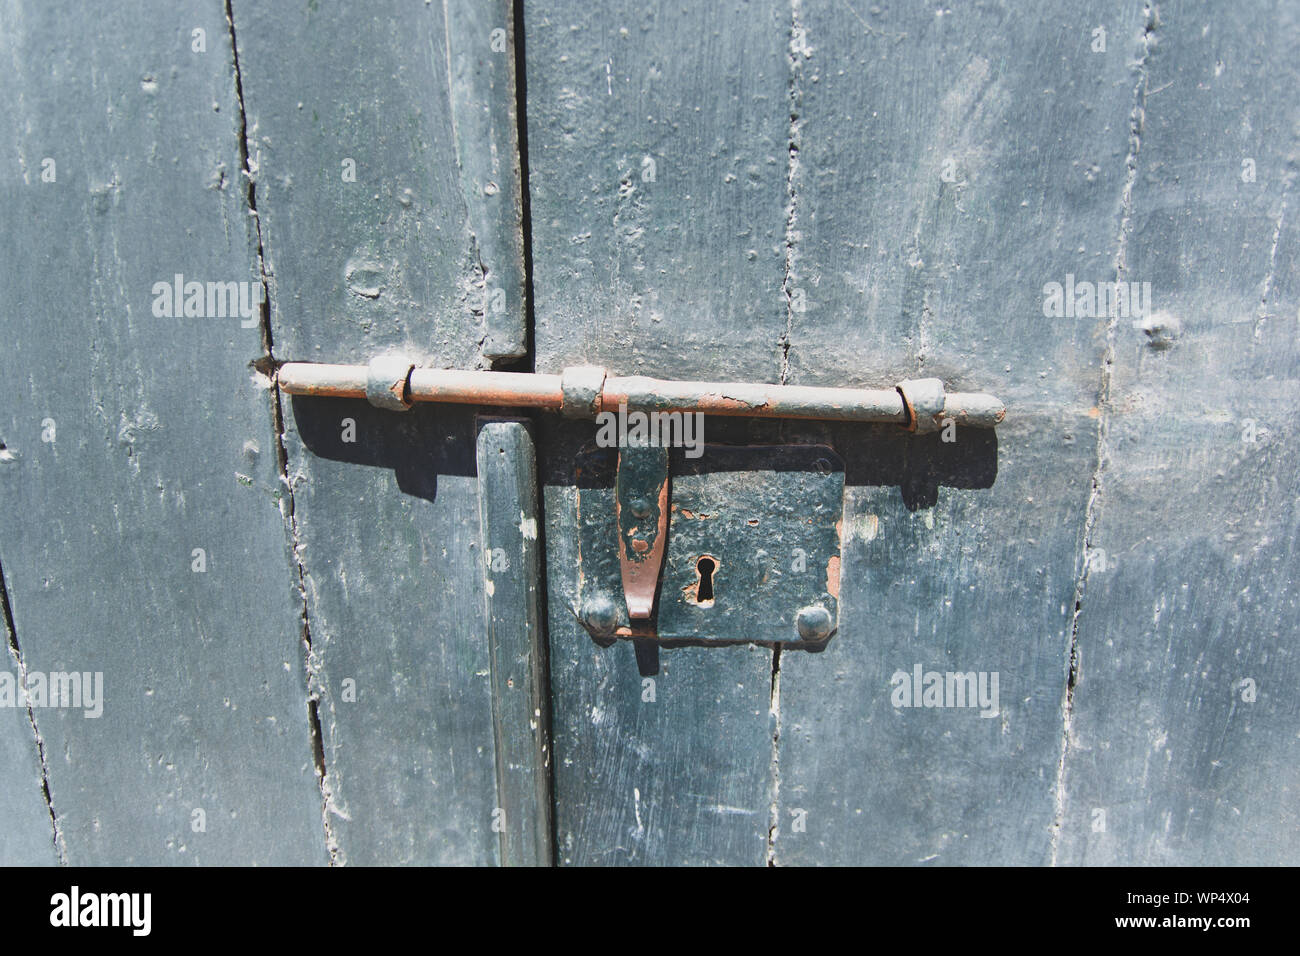 Rusty old slide bolt or tower bolt on a worn green door Stock Photo - Alamy